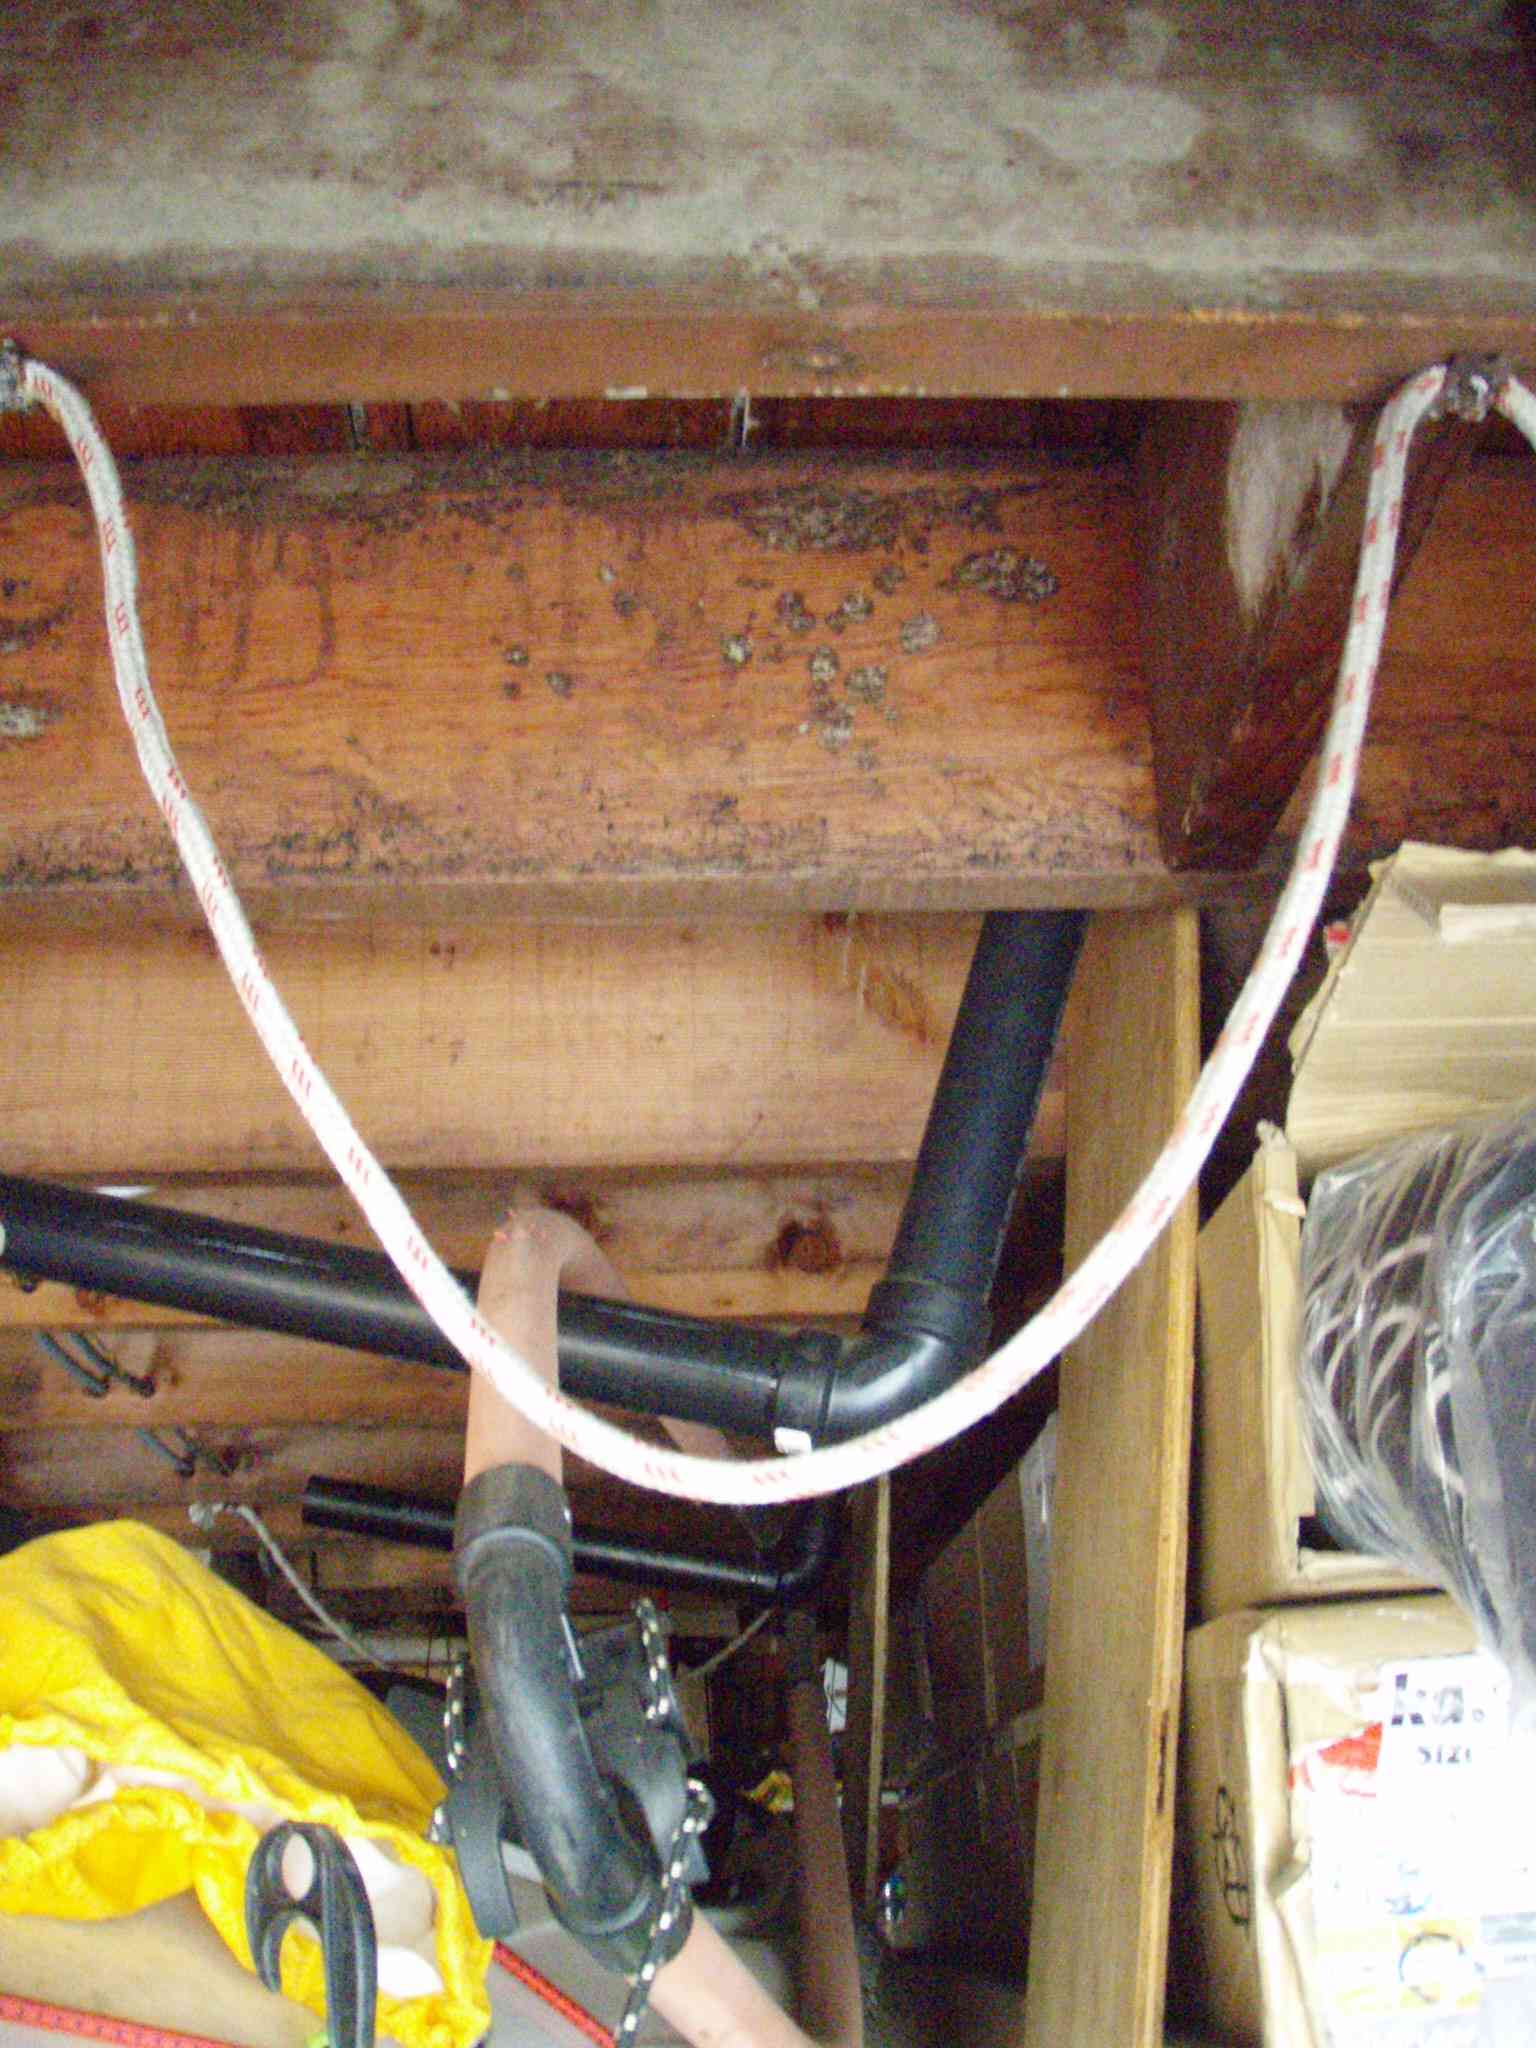 rope loop detail, ABS pipes for boom support, kayaks suspended by rope